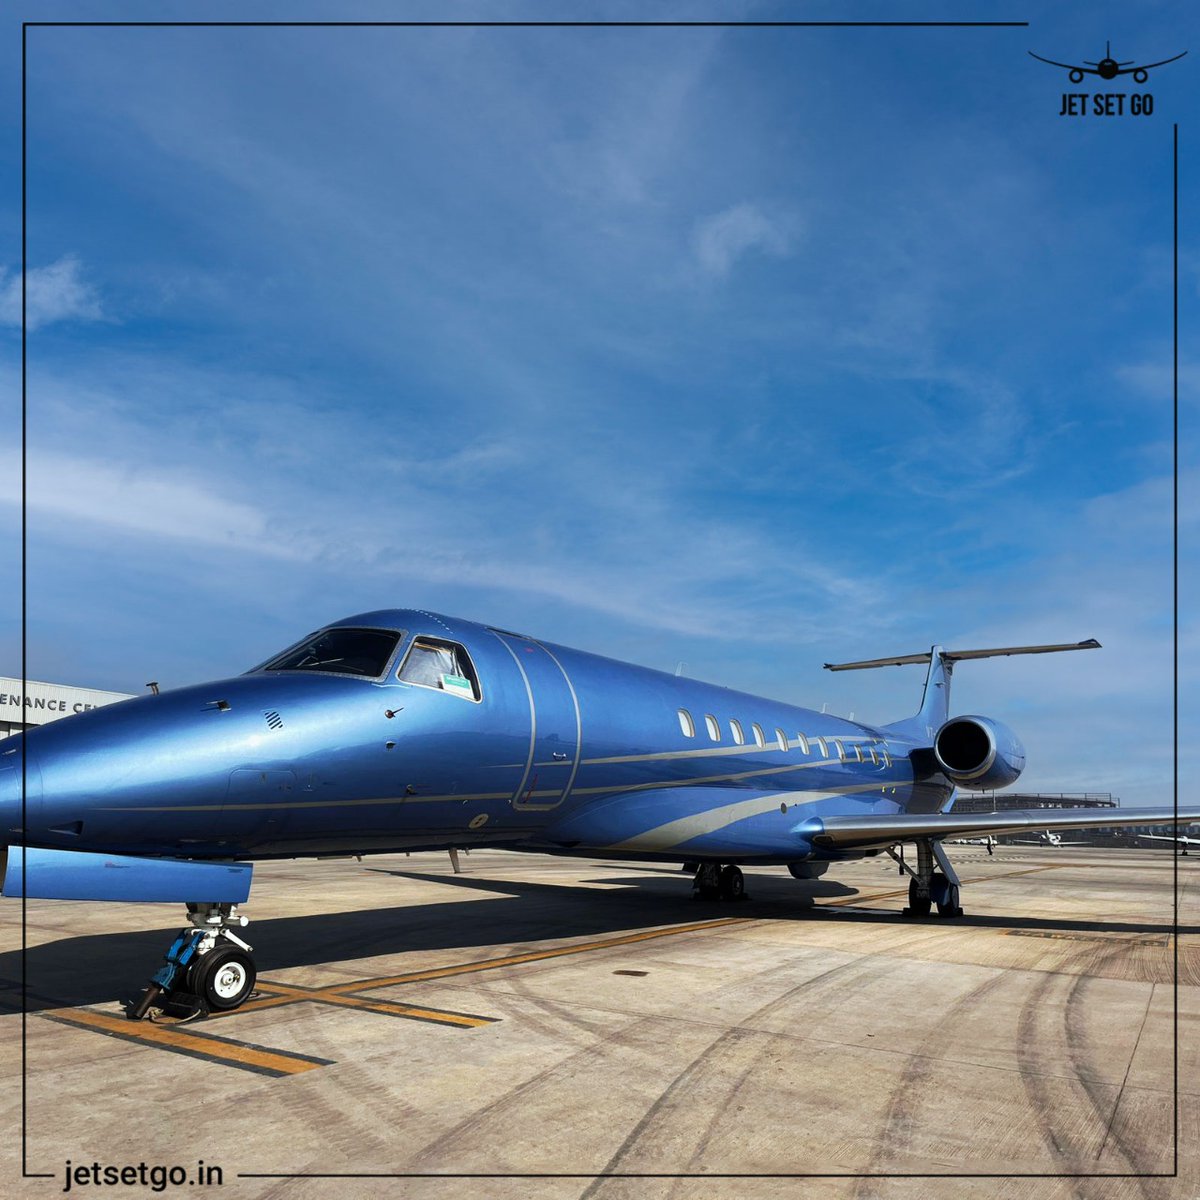 Our beauty in blue is all set to glide high in the sky ✈️☁️
To explore the skies today,
Call us at +91-11-40845858 or Visit jetsetgo.in

#Jetsetgo #JSG_EXPERIENCE #lavishlifestyle #privatejetdaily
#privatejetcharters #privatecharter  #privateaviation #comfortzone